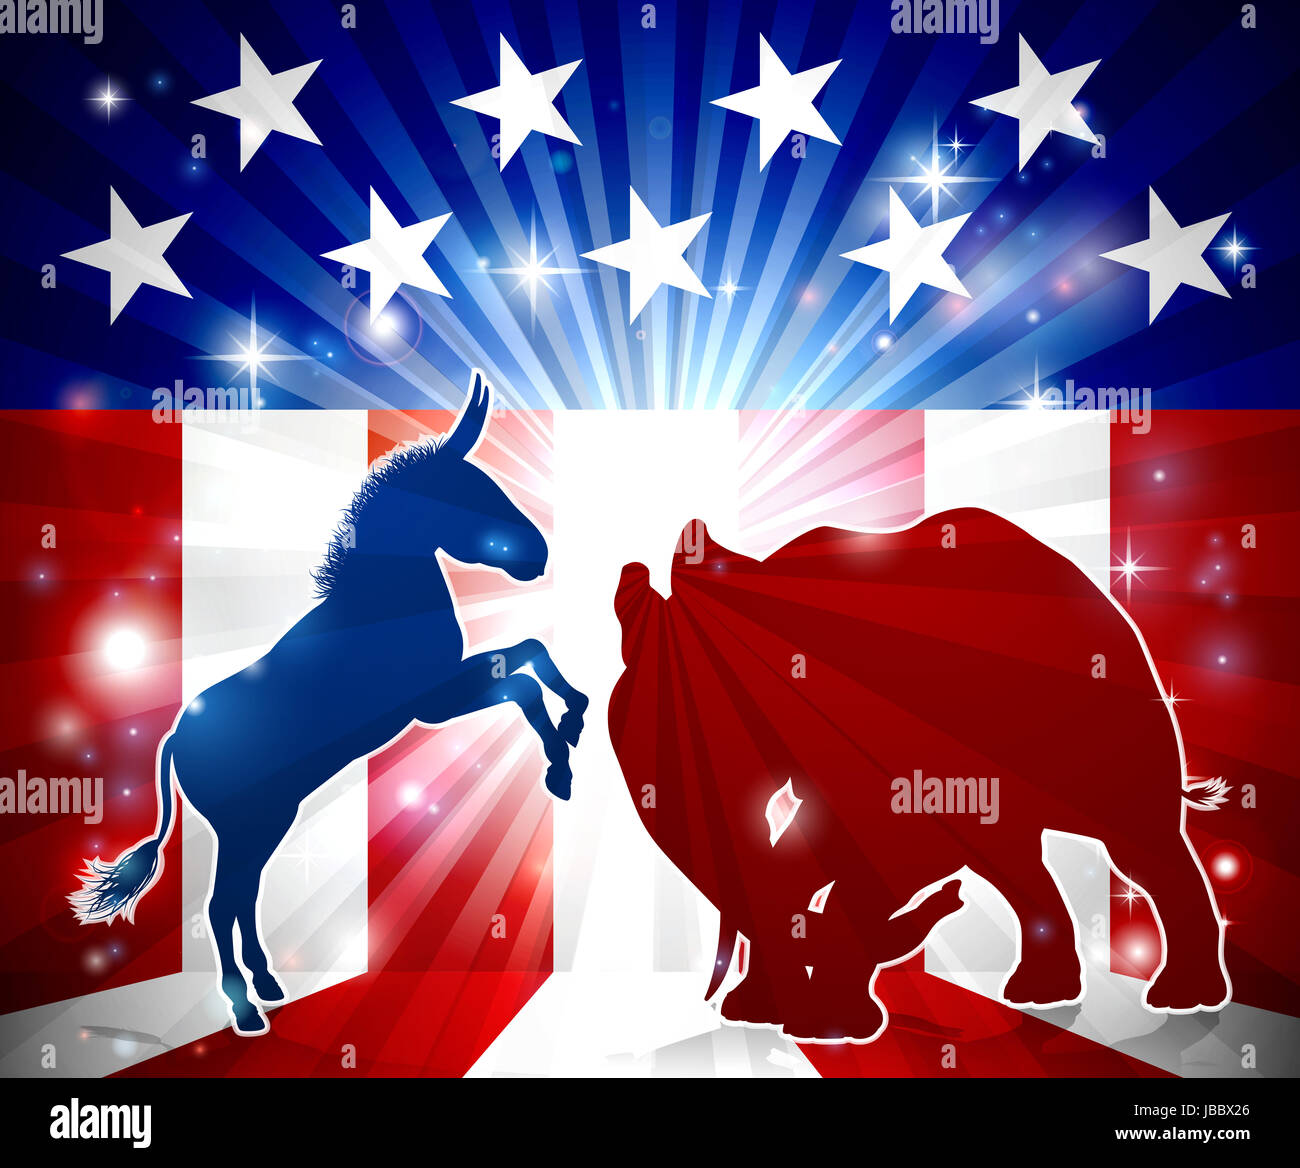 A donkey and elephant in silhouette facing off with an American flag in the background democrat and republican political mascot animals Stock Photo